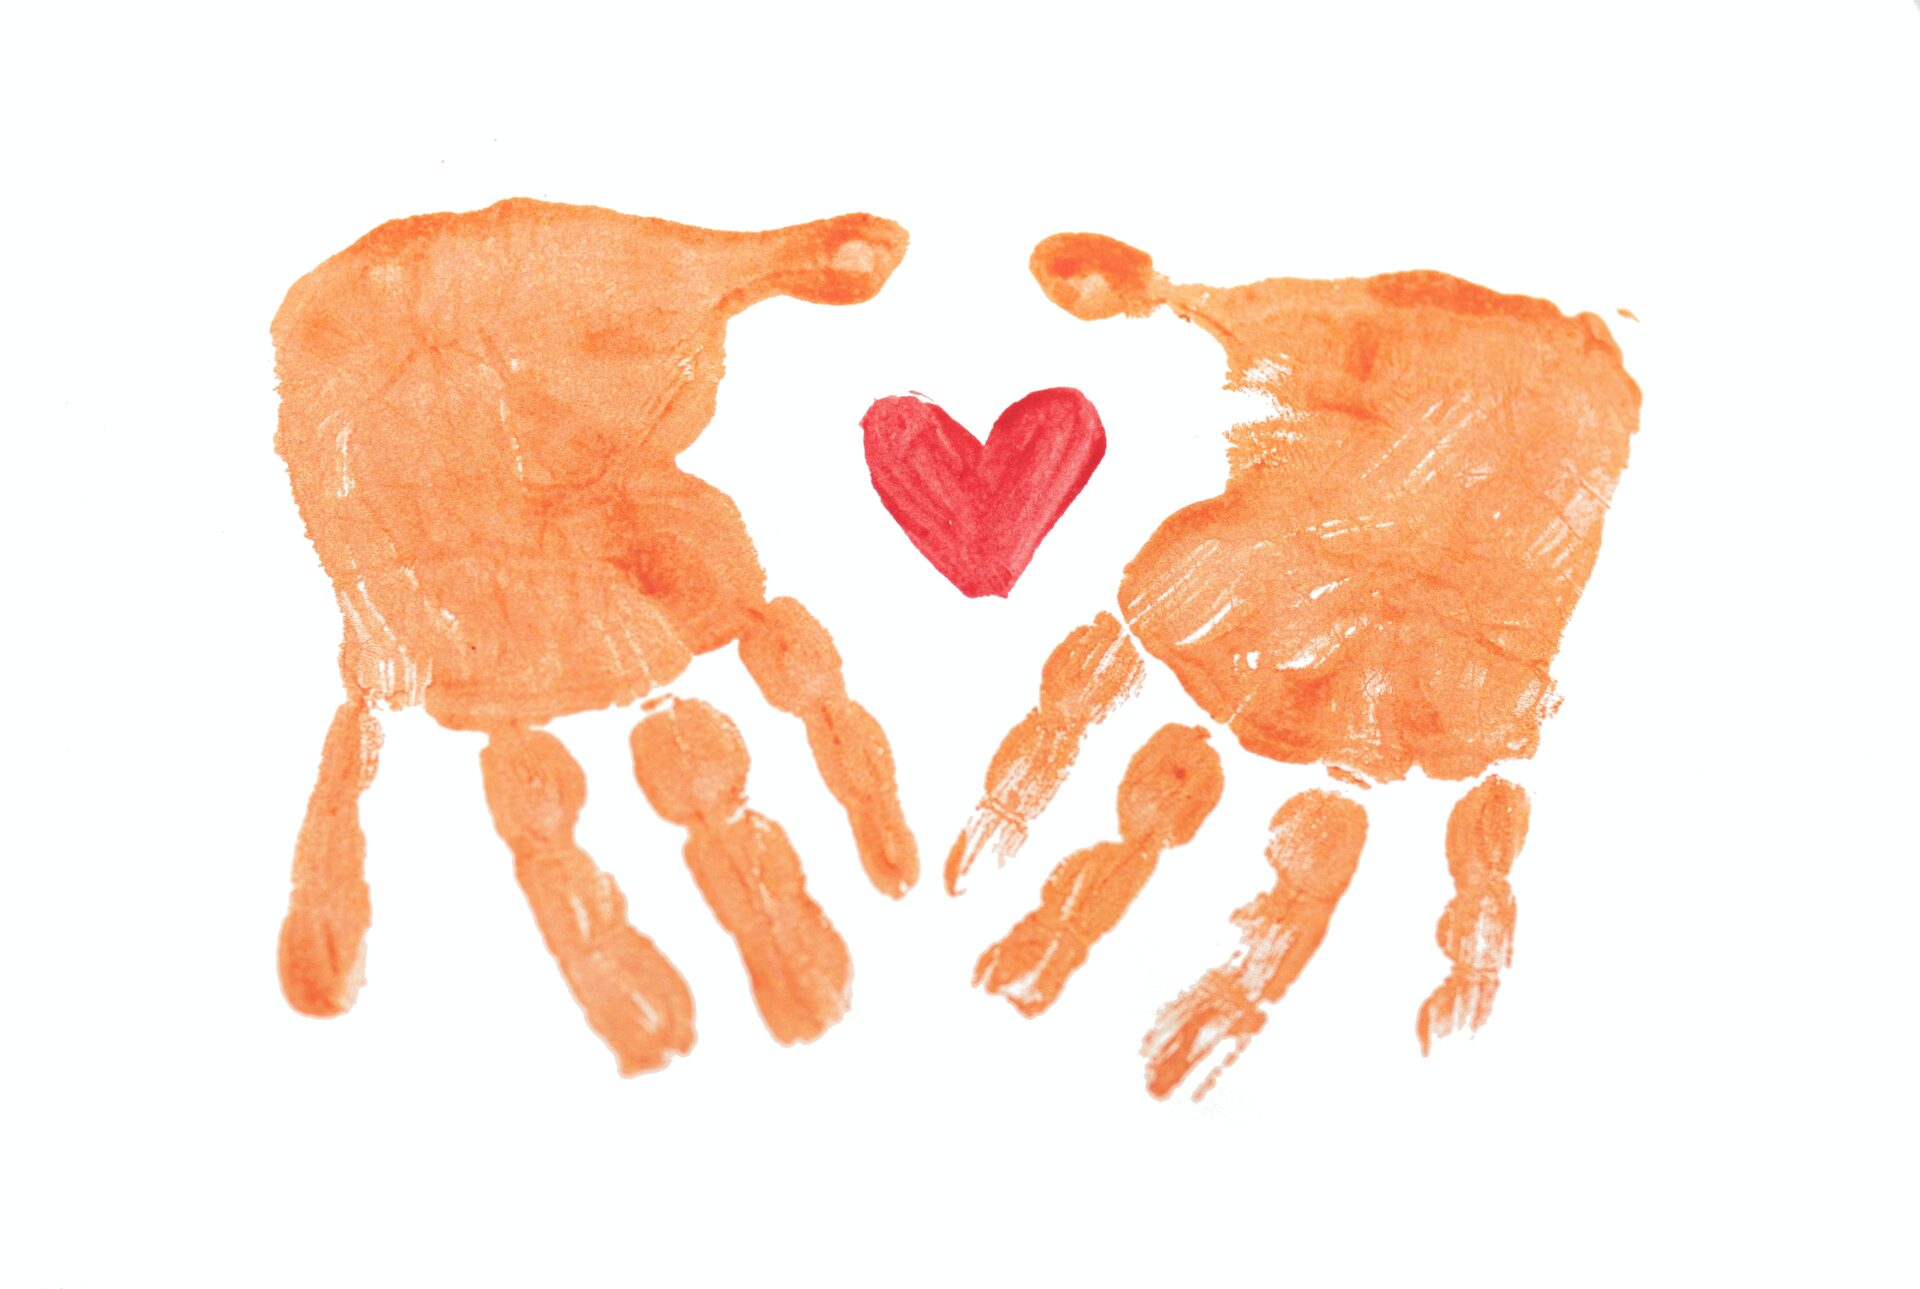 Water color painting of two hands surrounding a heart.